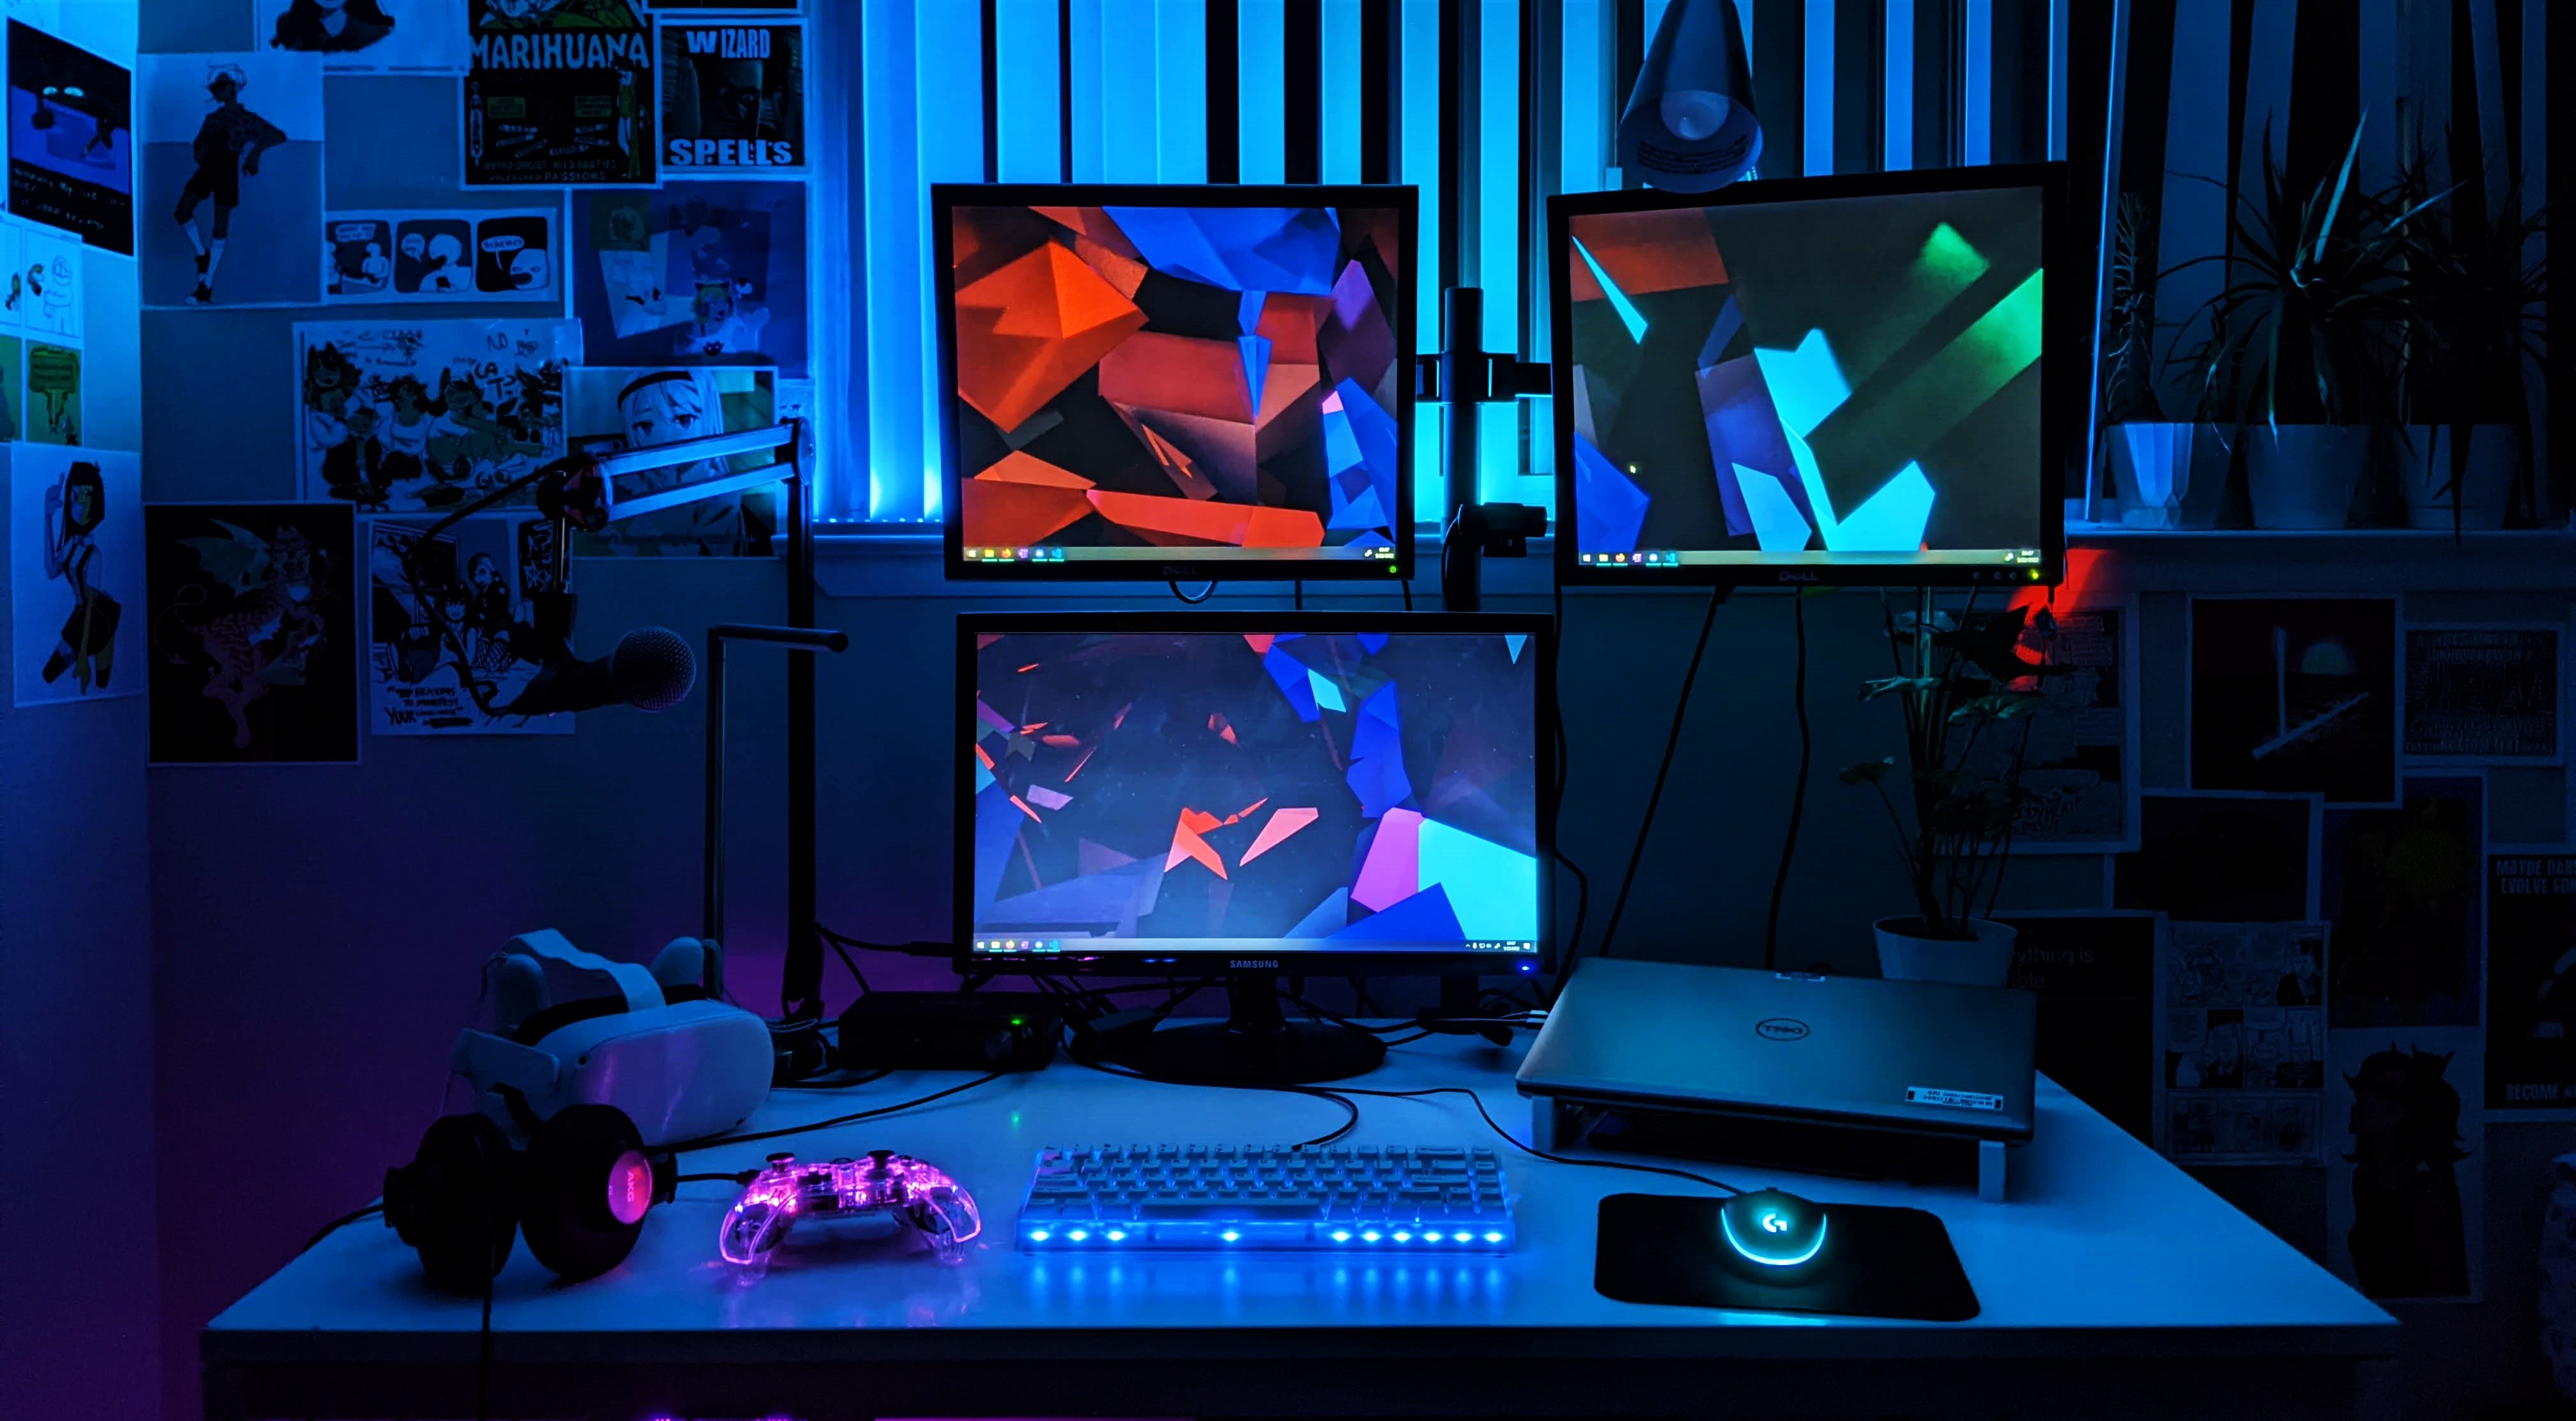 image of the desk and monitors